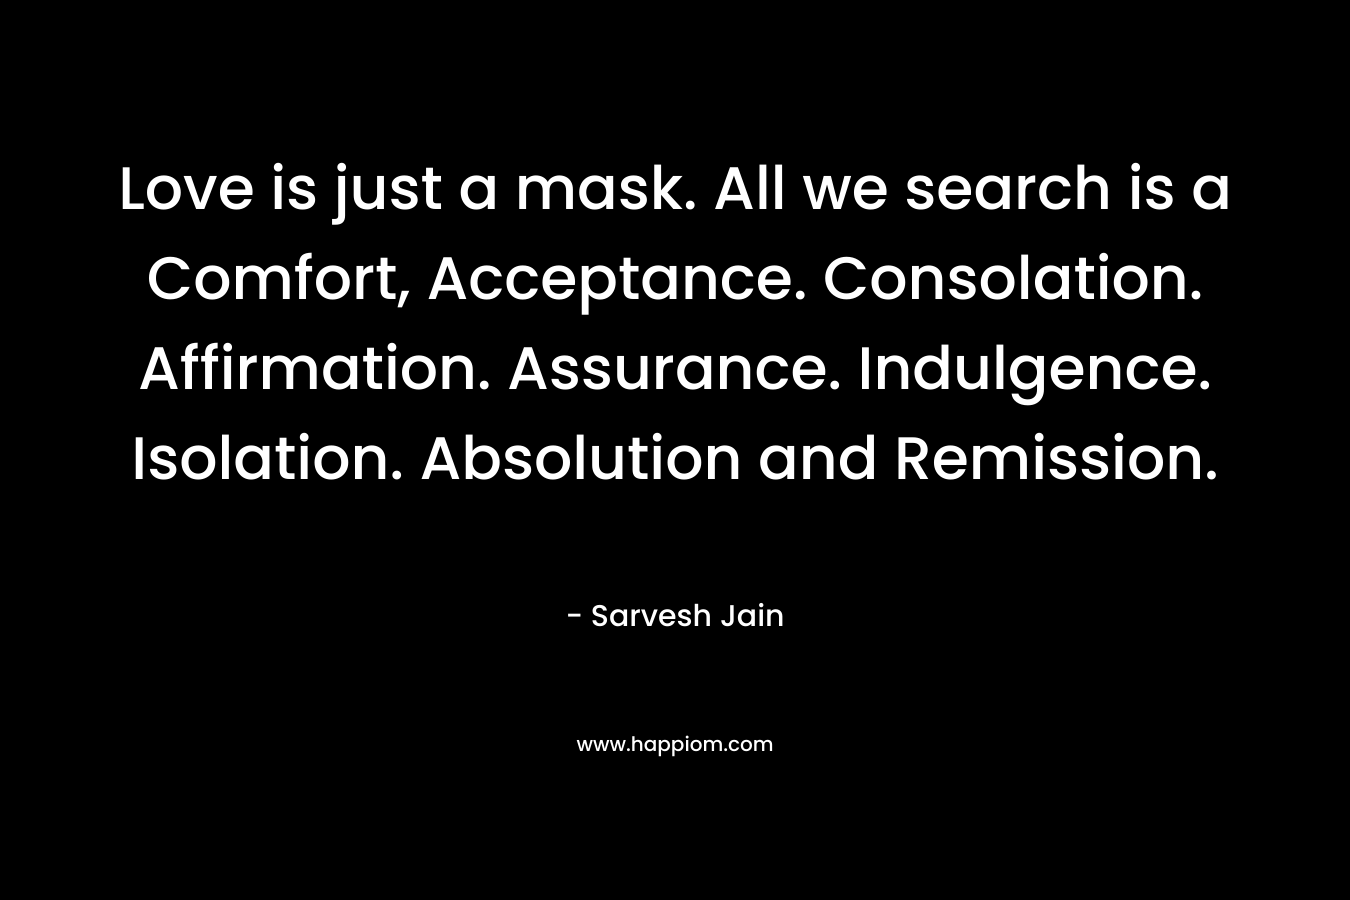 Love is just a mask. All we search is a Comfort, Acceptance. Consolation. Affirmation. Assurance. Indulgence. Isolation. Absolution and Remission.